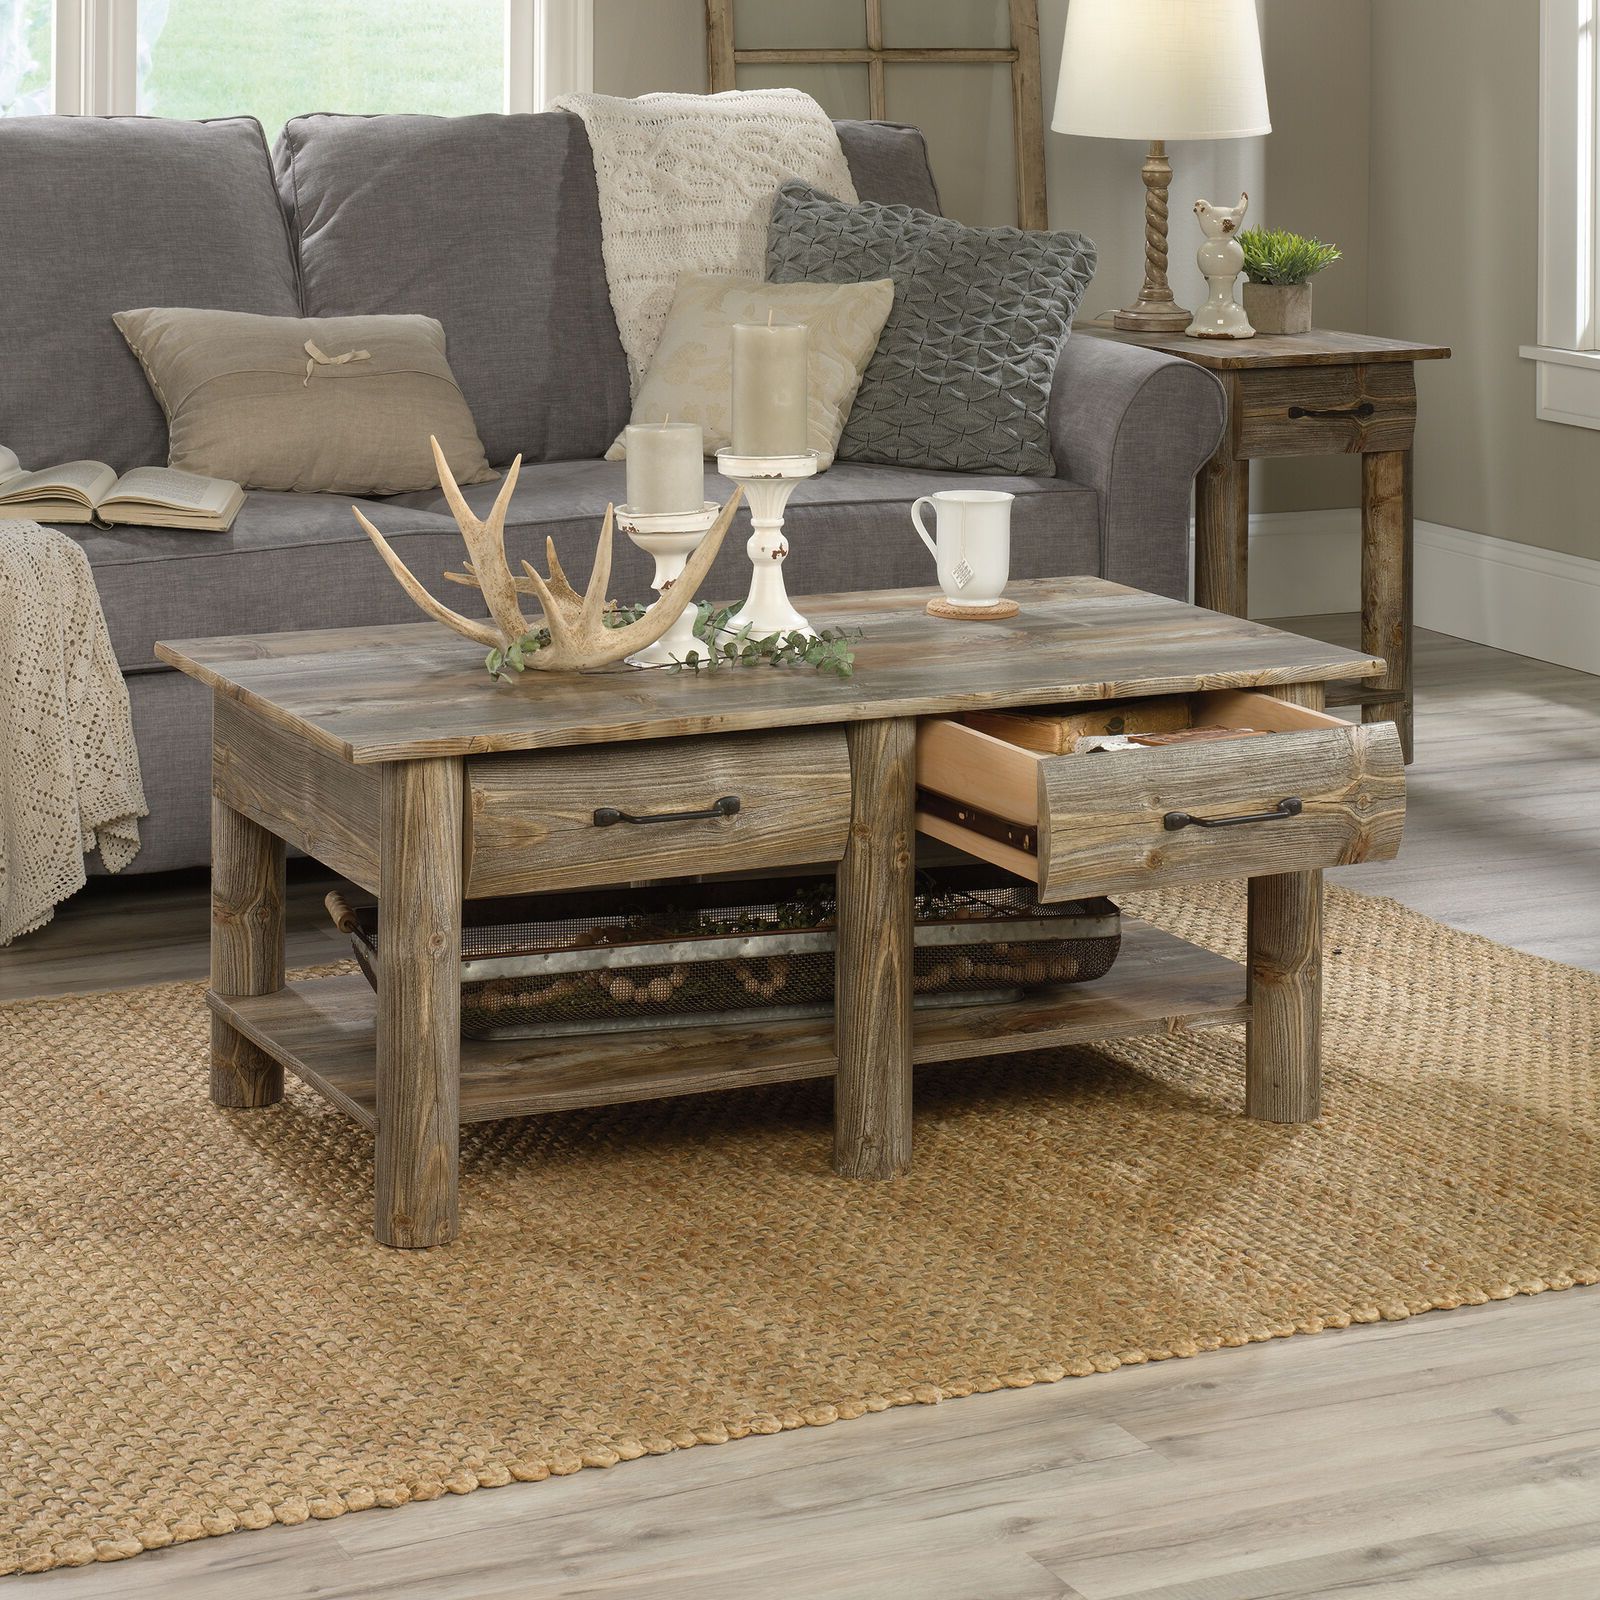 Coffee Table Rustic Farmhouse Storage Faux Drawer Wood Log Living Room For Living Room Farmhouse Coffee Tables (Gallery 16 of 20)